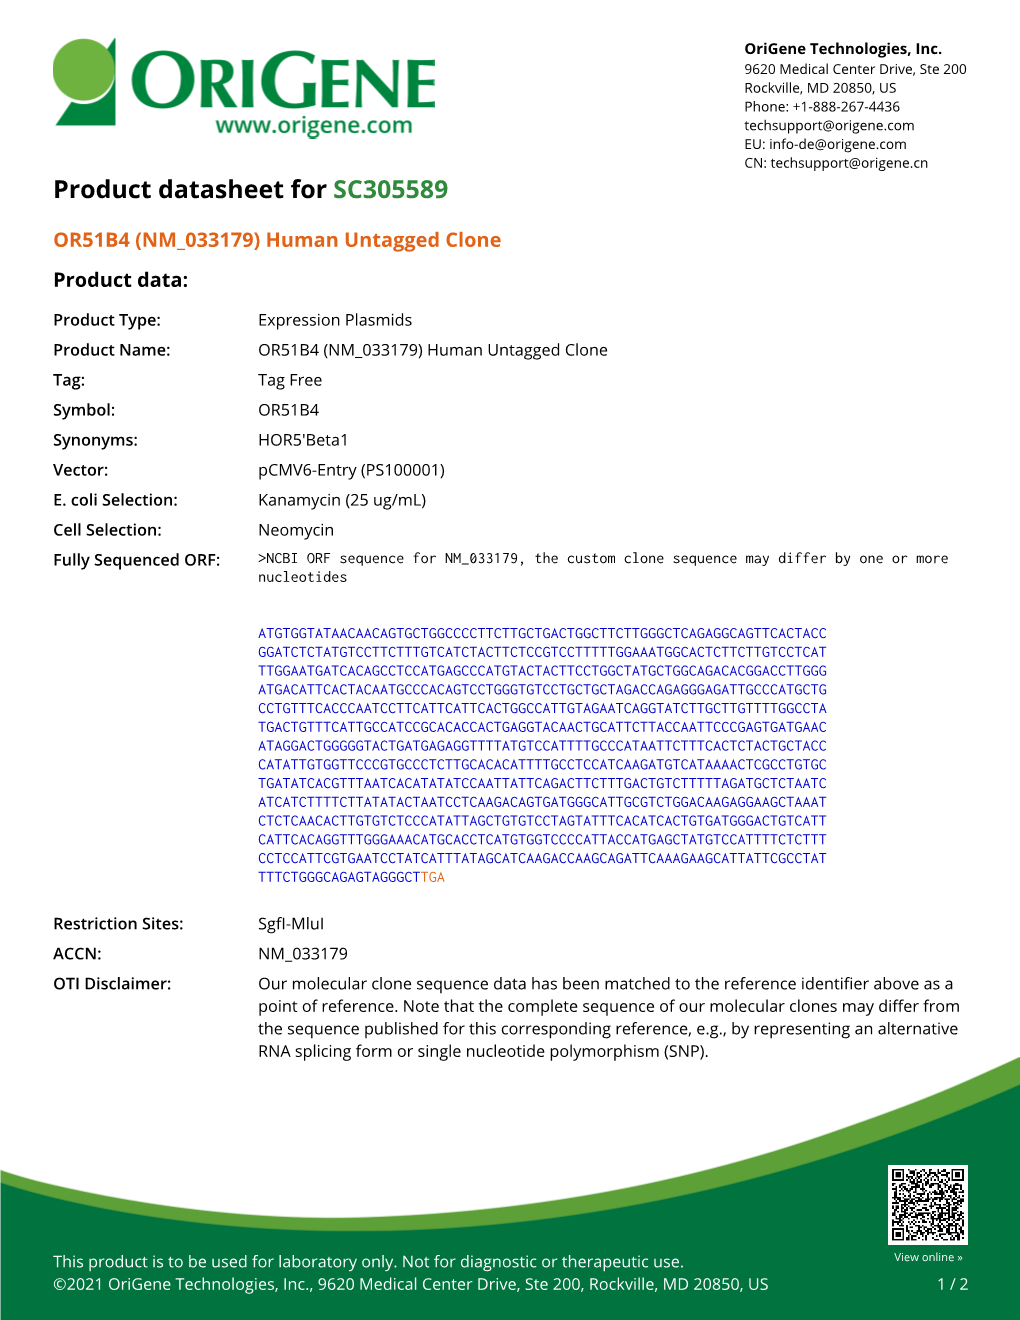 OR51B4 (NM 033179) Human Untagged Clone Product Data